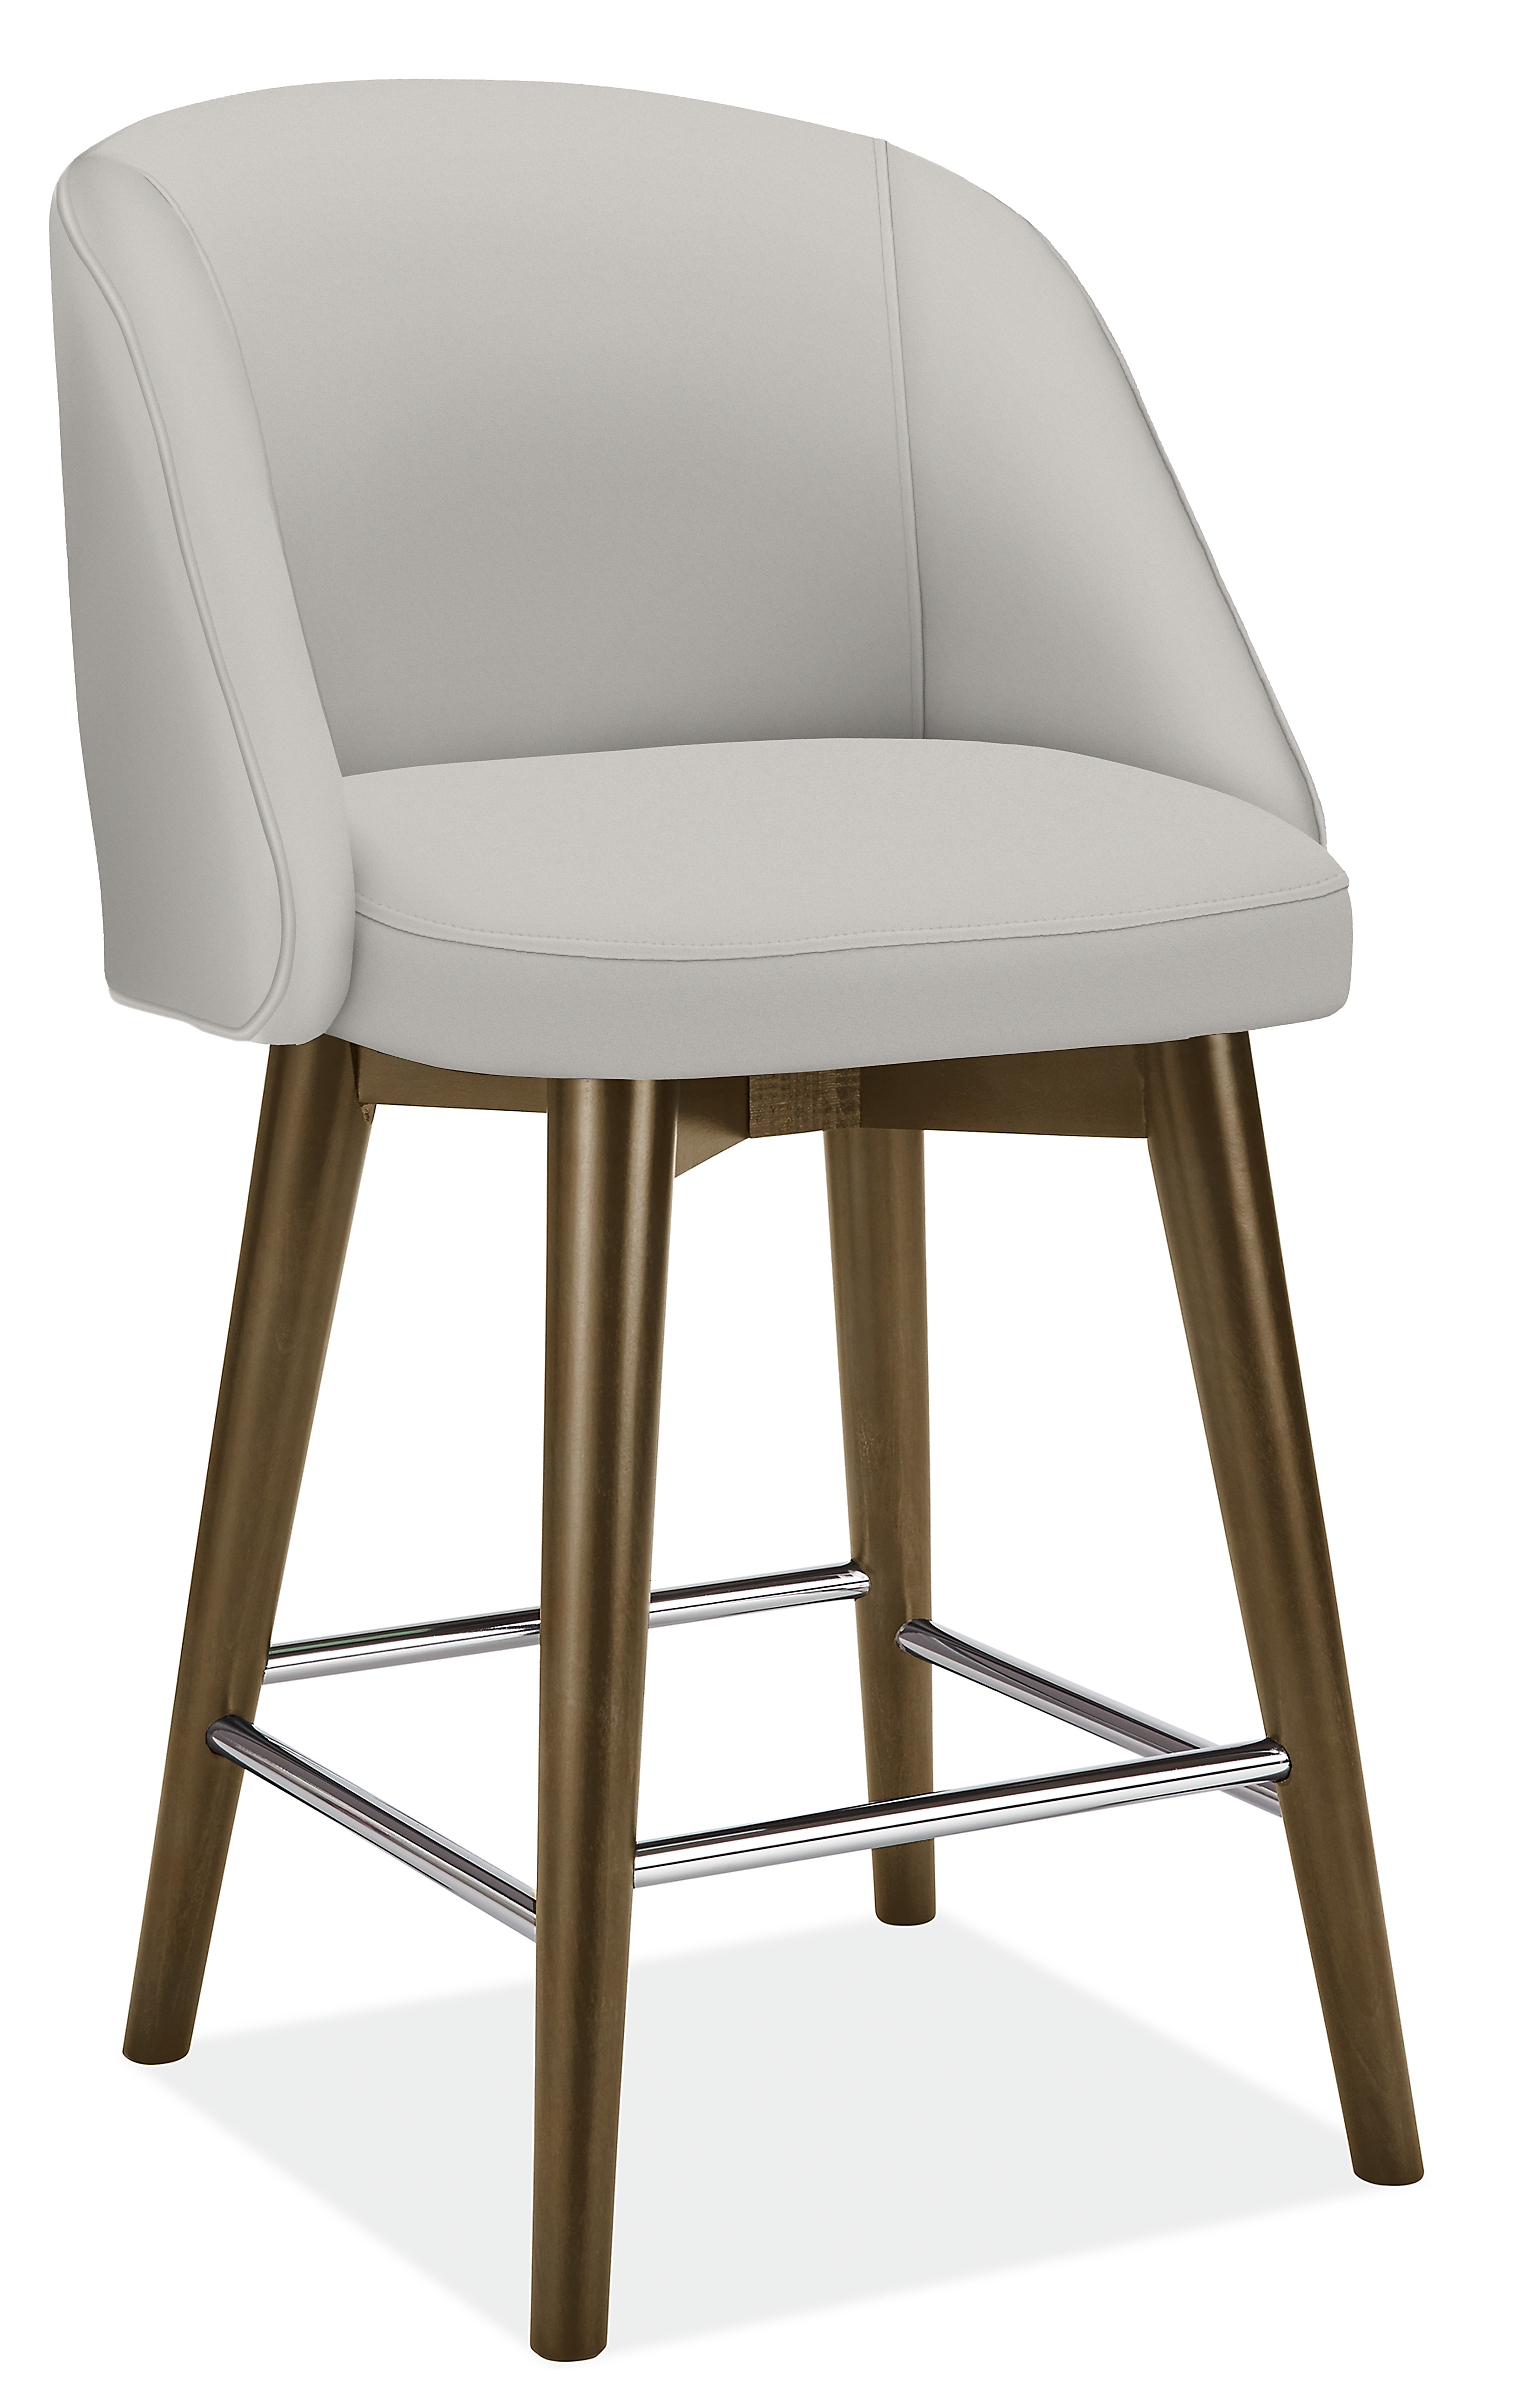 Cora Swivel Counter Stool in View Grey with Charcoal Legs